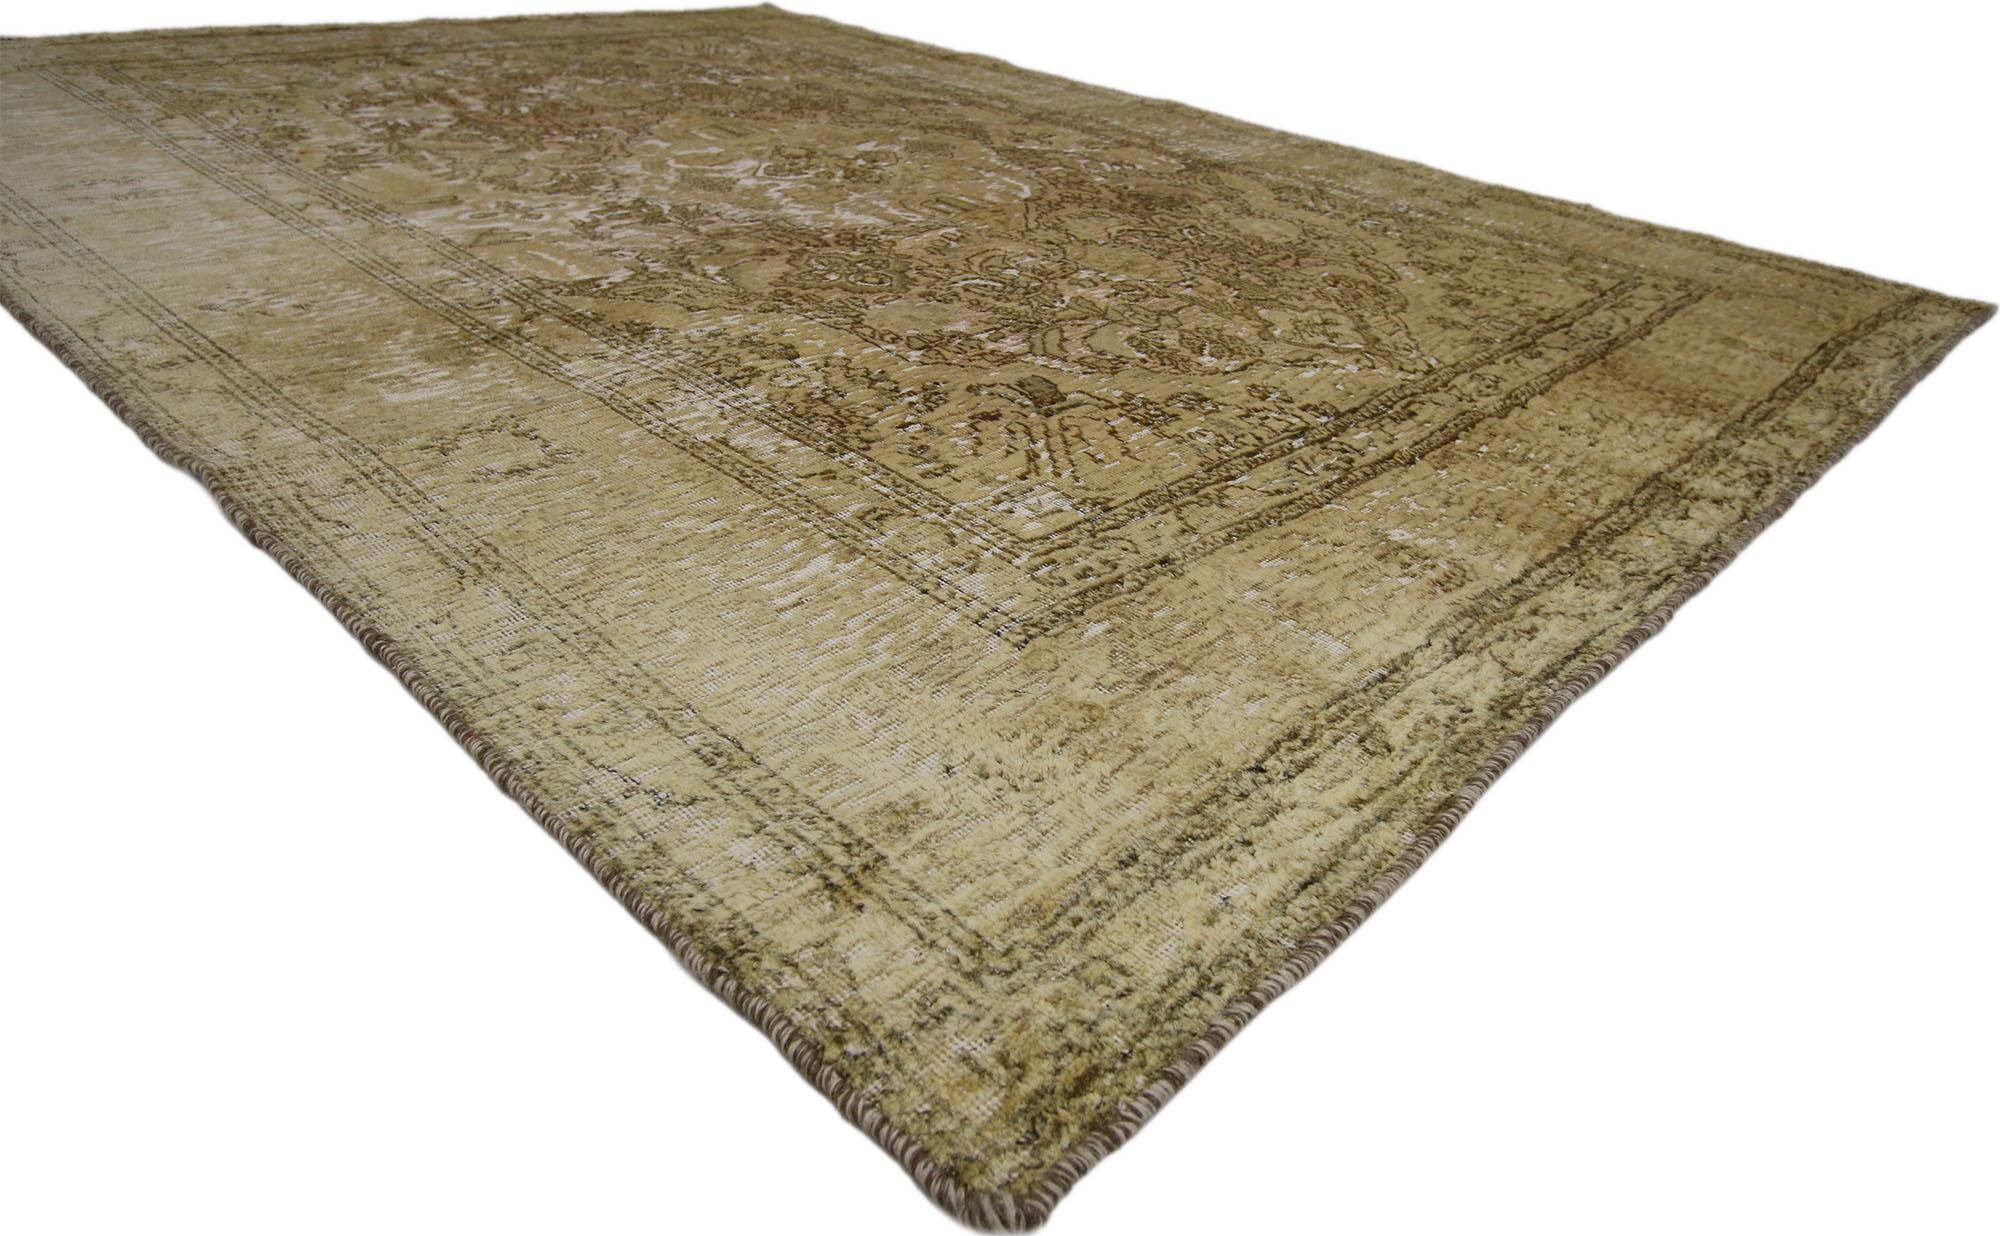 60717 Distressed Vintage Persian Overdyed Rug with Rustic French Industrial Style 08'00 x 09'01. Balancing a timeless design with a romantic rustic sensibility and warm earth tone colors, this distressed vintage Persian overdyed rug with creates a